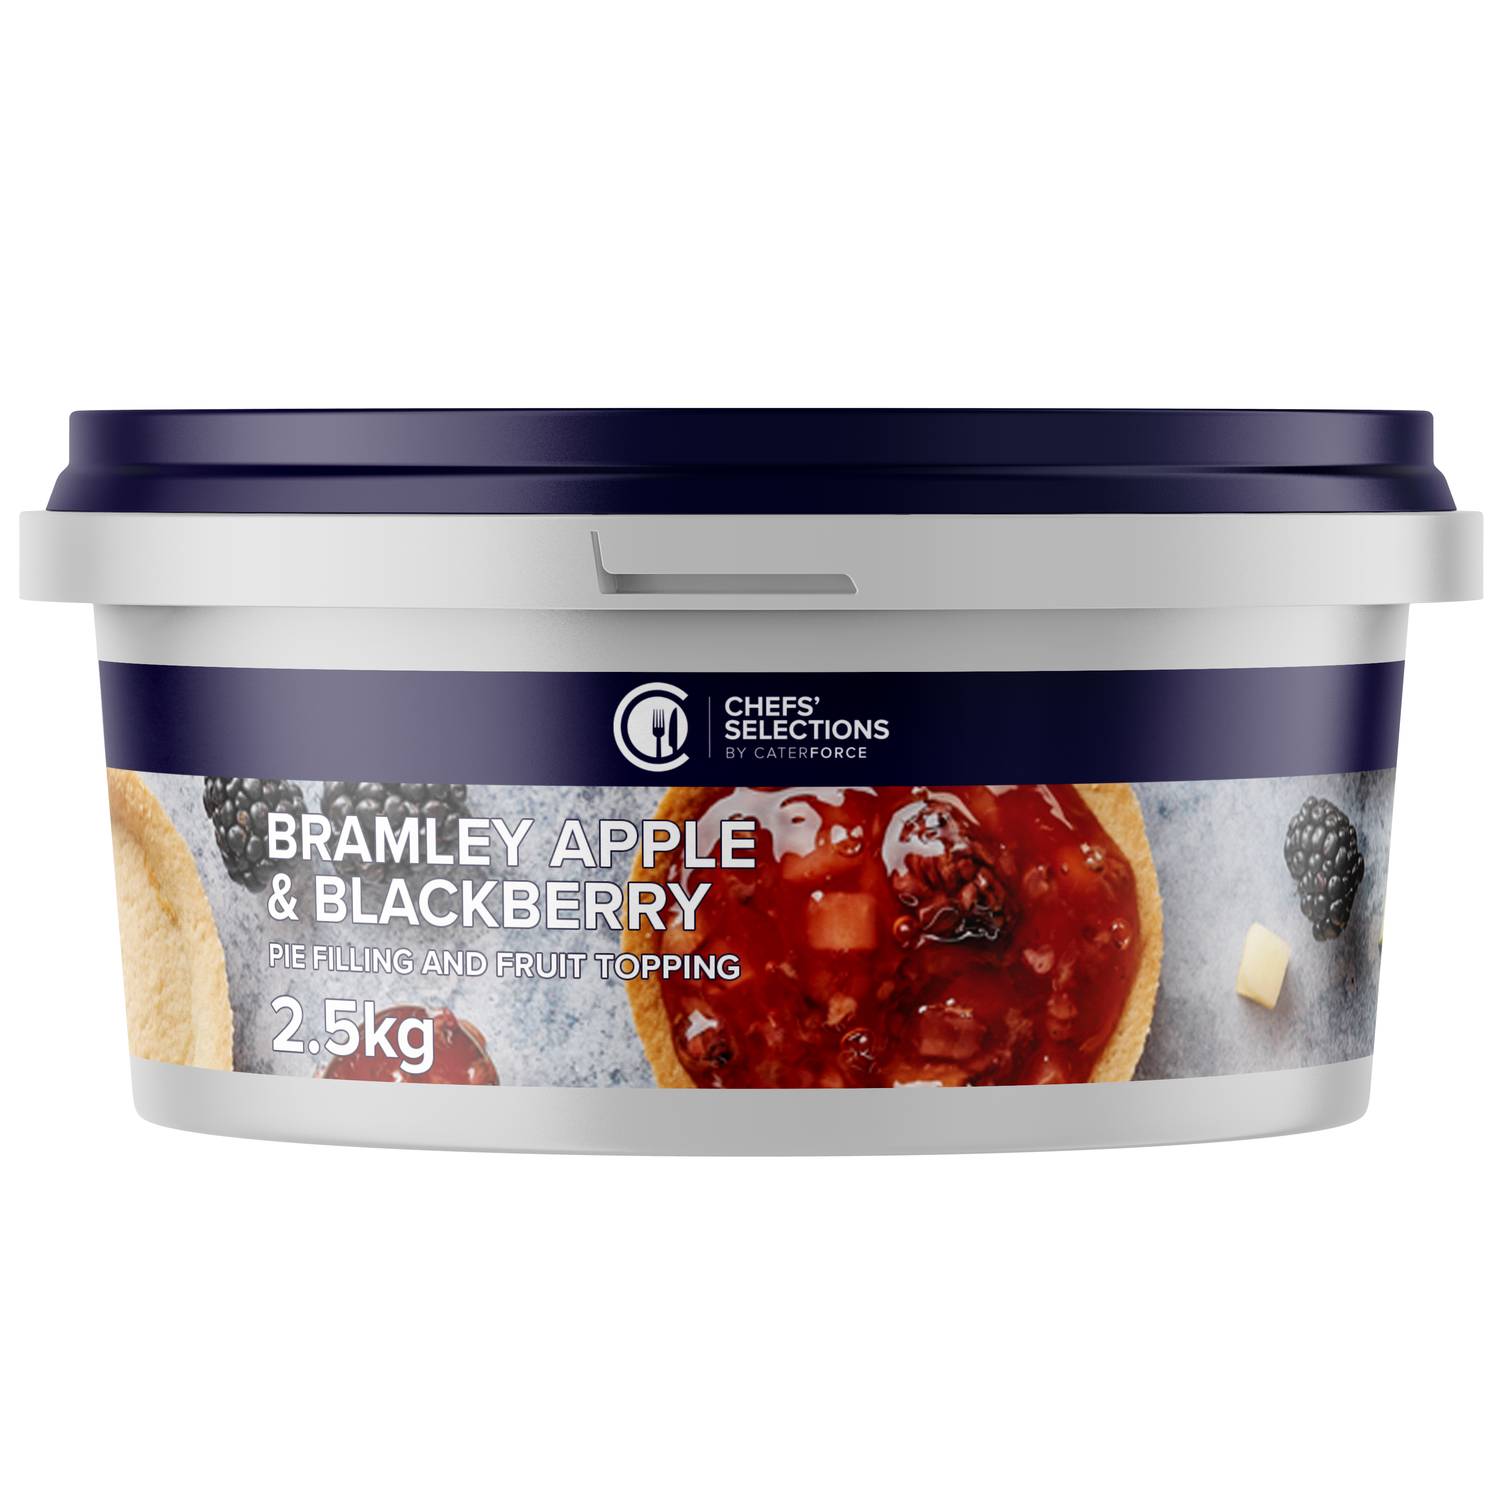 Chefs’ Selections Bramley Apple & Blackberry Pie Filling And Fruit Topping (4 x 2.5kg)